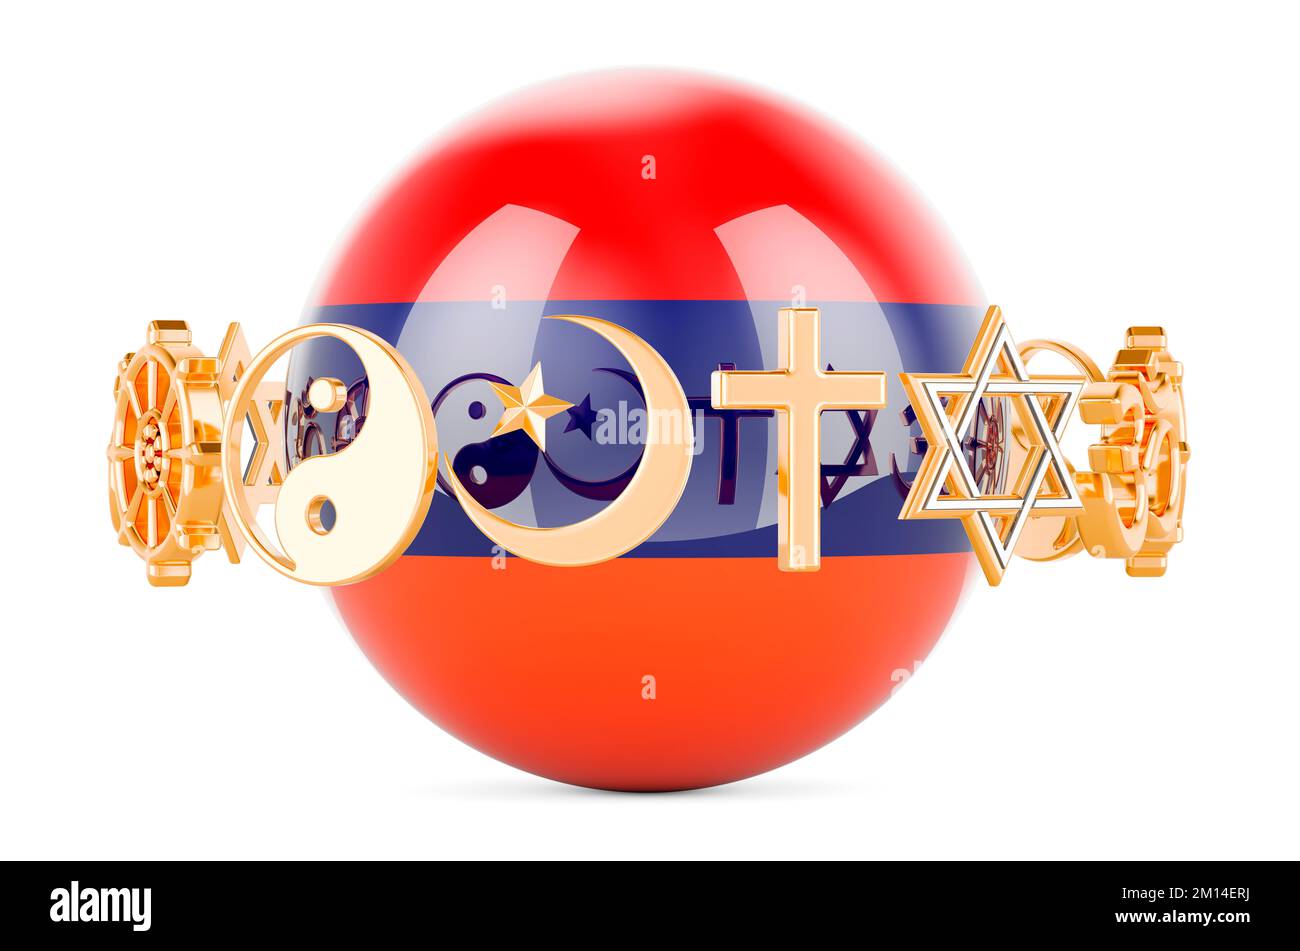 Armenian flag painted on sphere with religions symbols around, 3D rendering isolated on white background Stock Photo